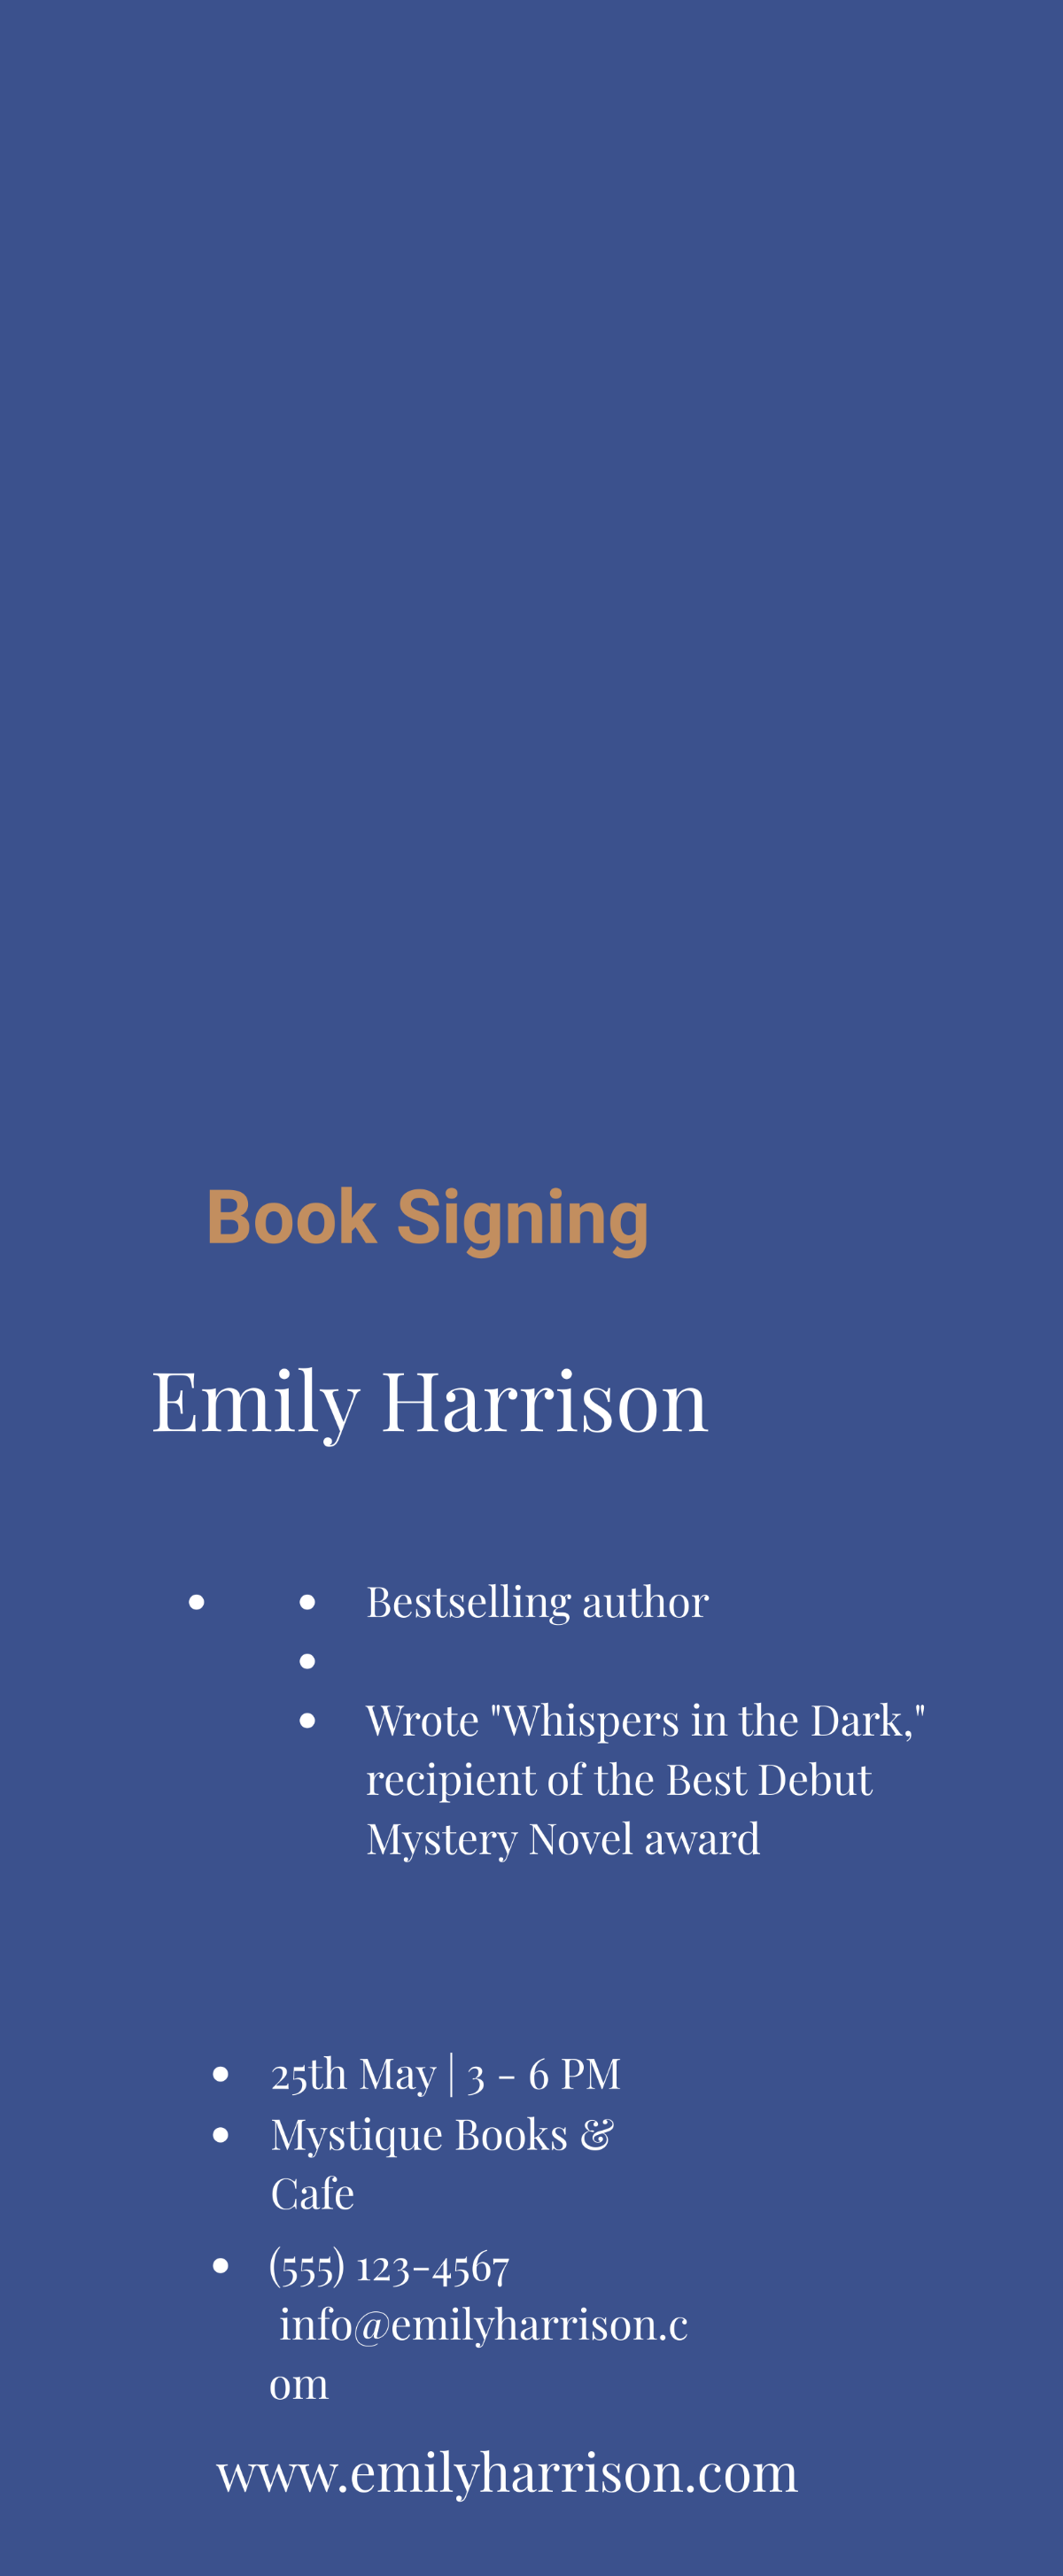 Free Author Retractable Banner Template